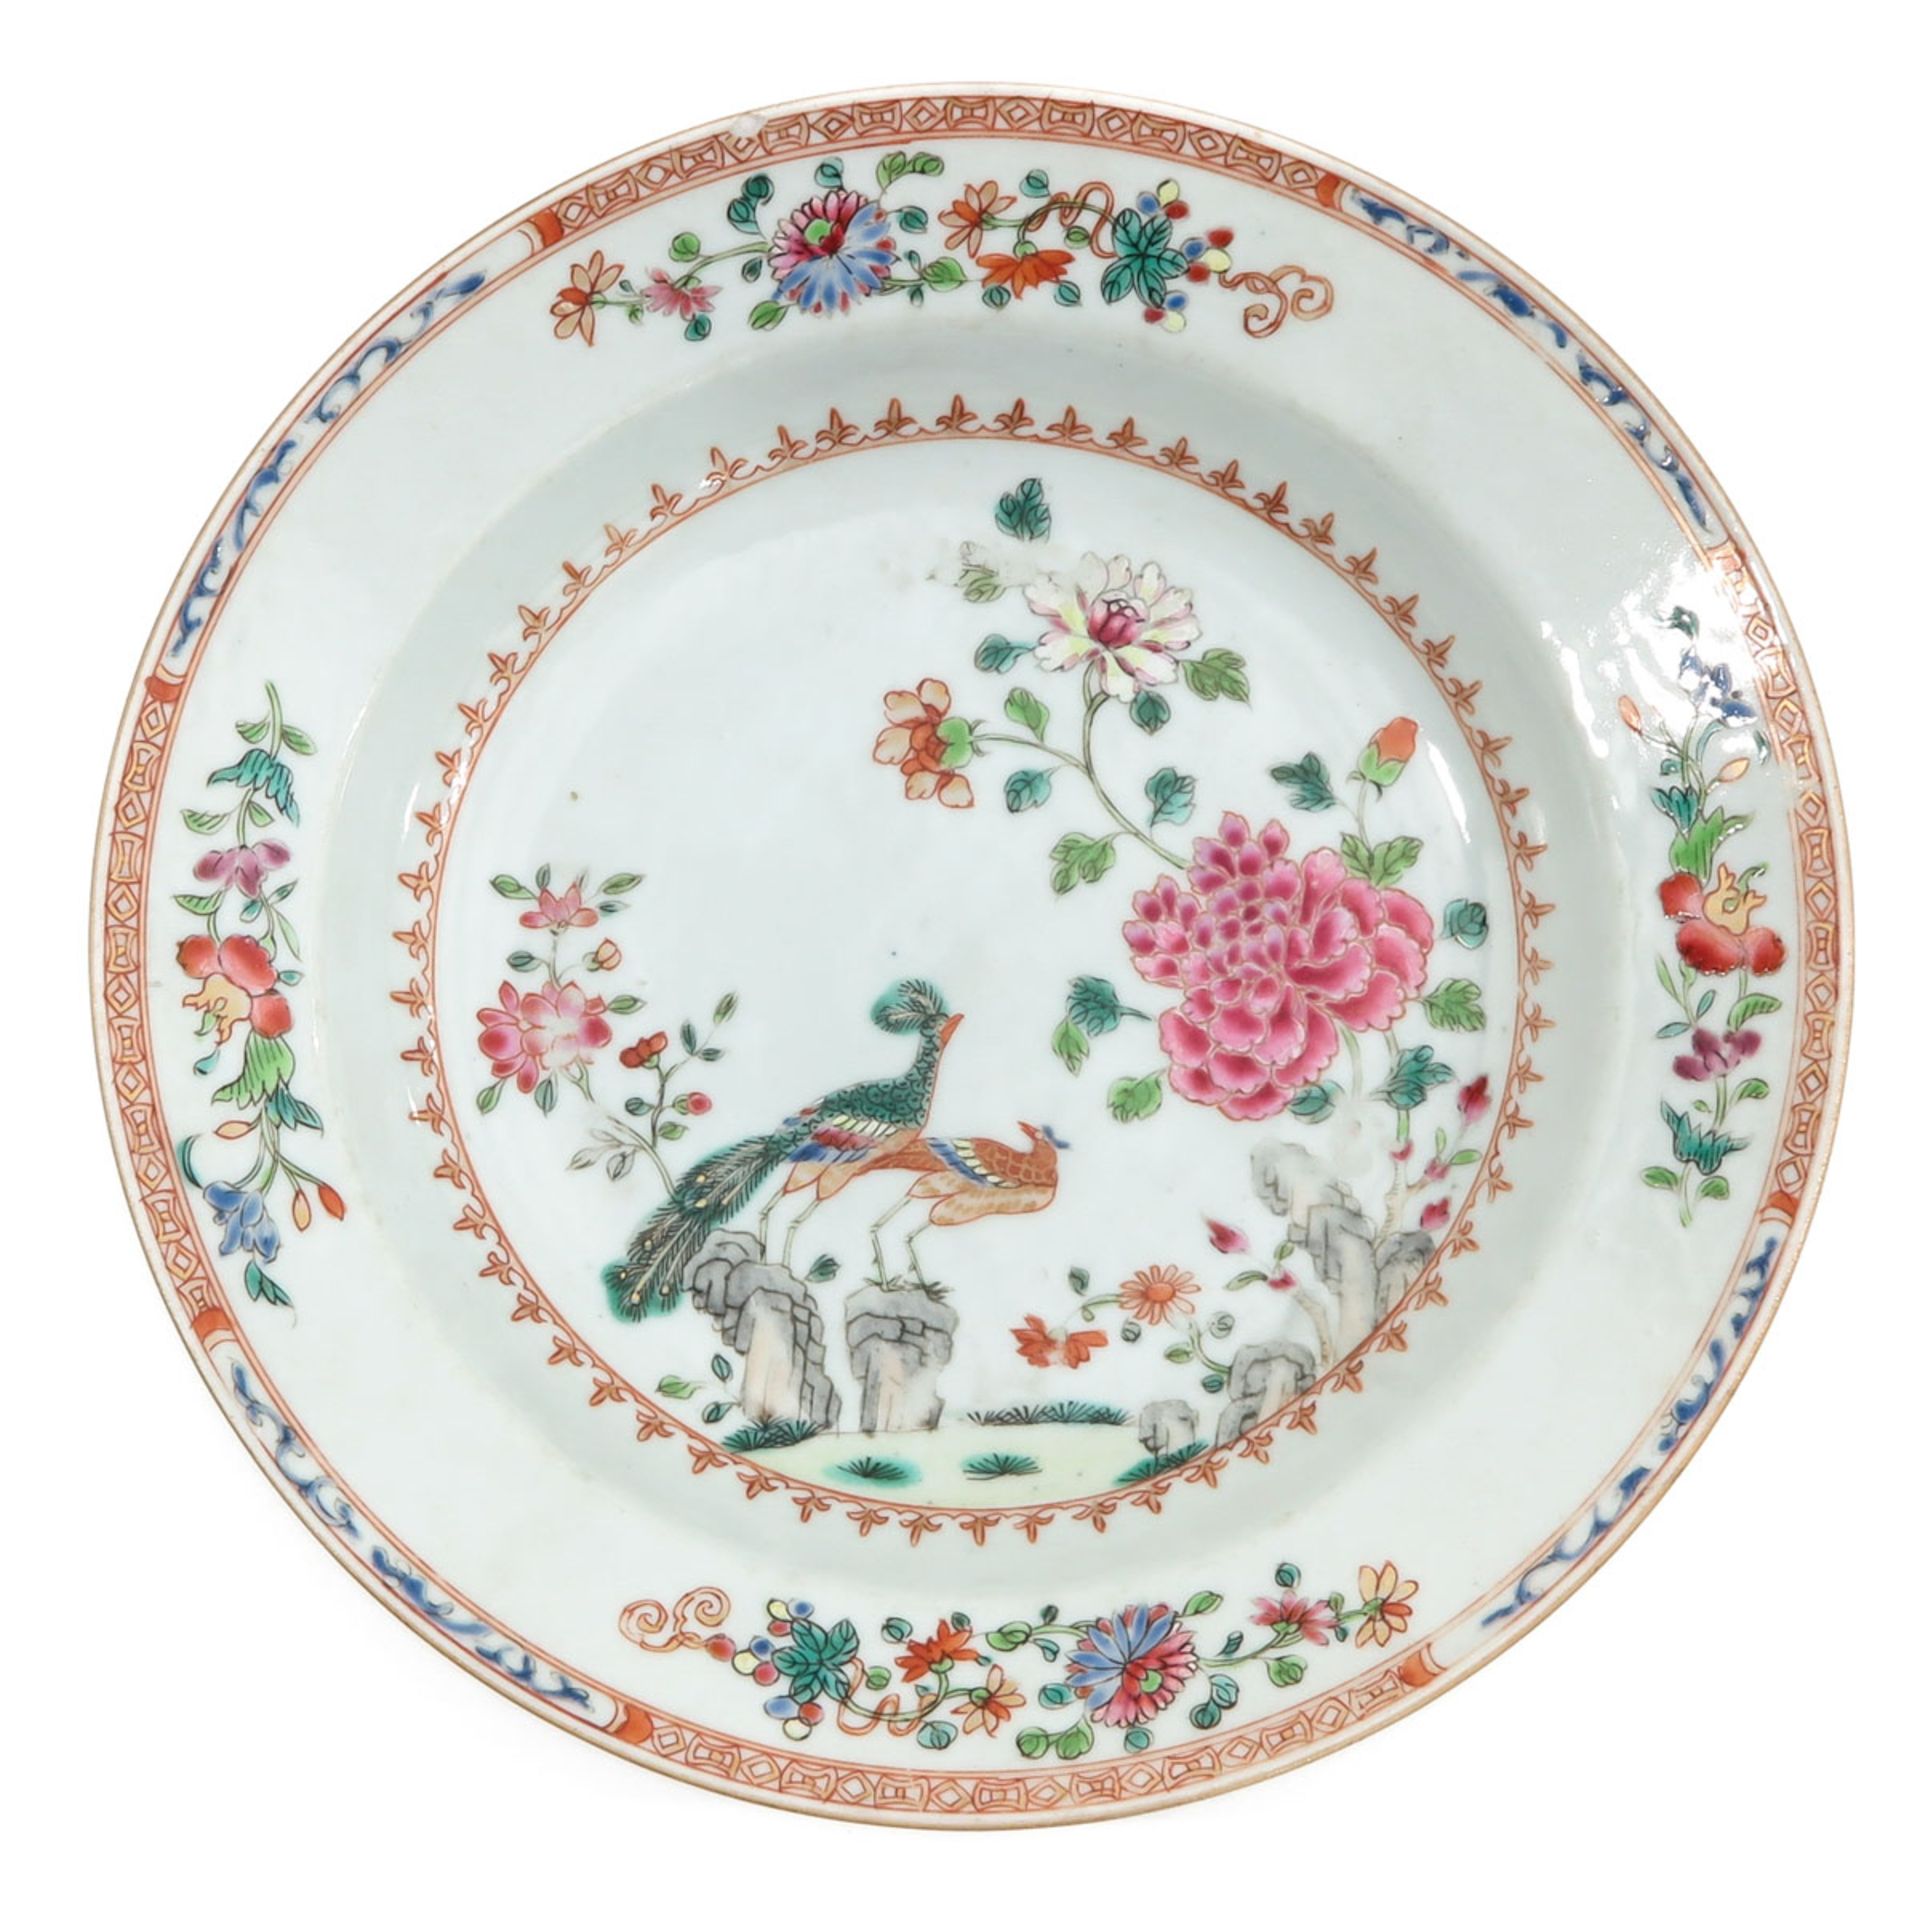 A Collection of 3 Famille Rose Plates - Image 5 of 10